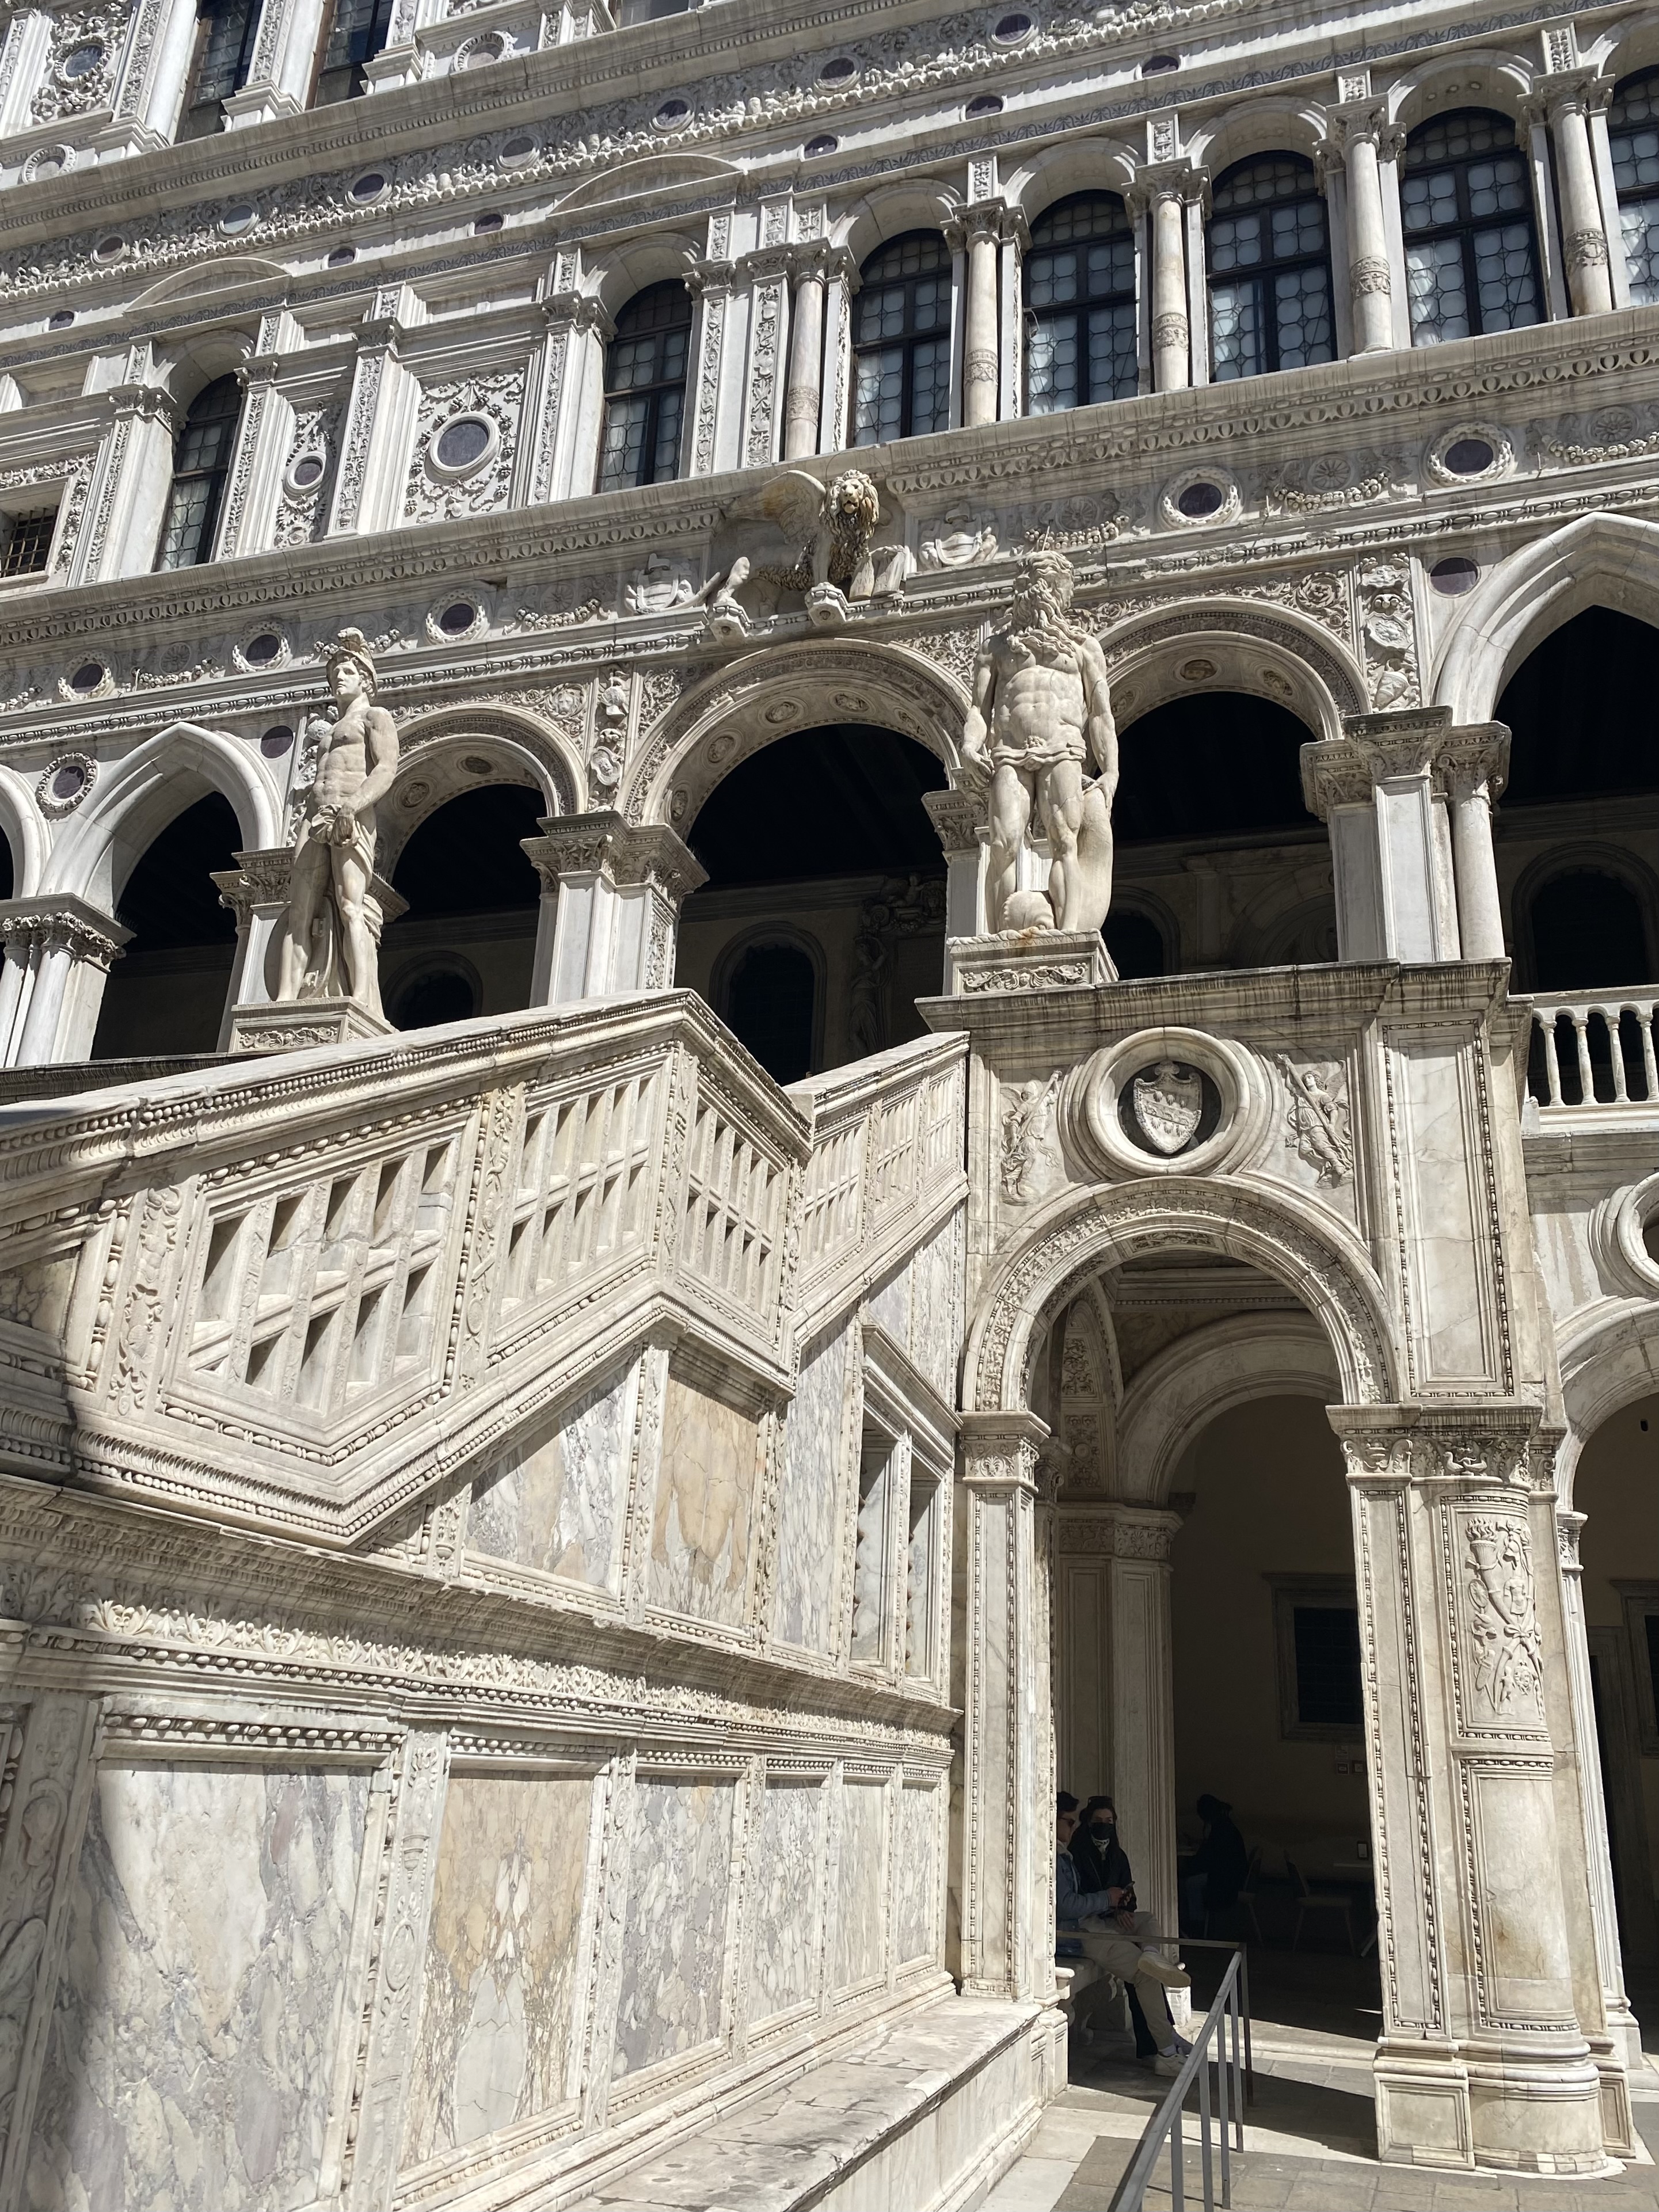 Staircase in courtyard of Doge's Palace in Venice Italy